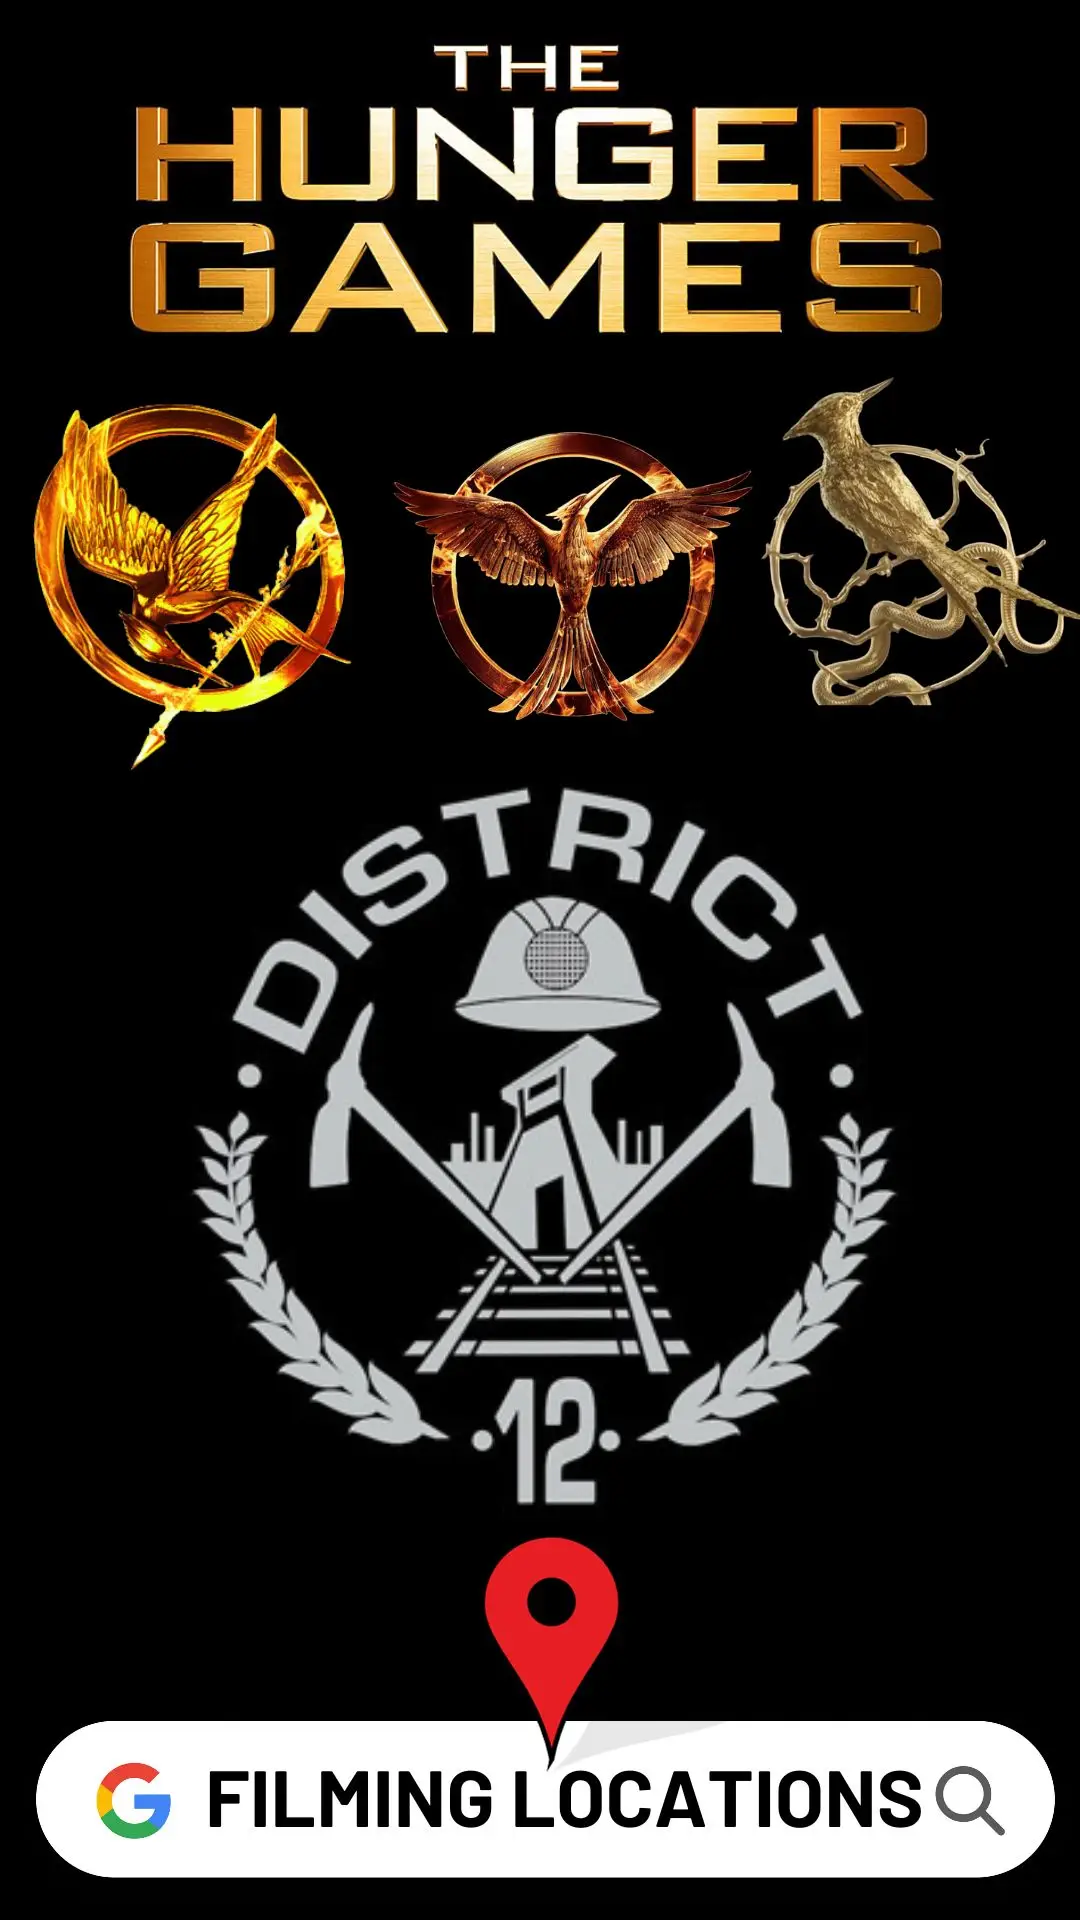 District 12 Filming Locations